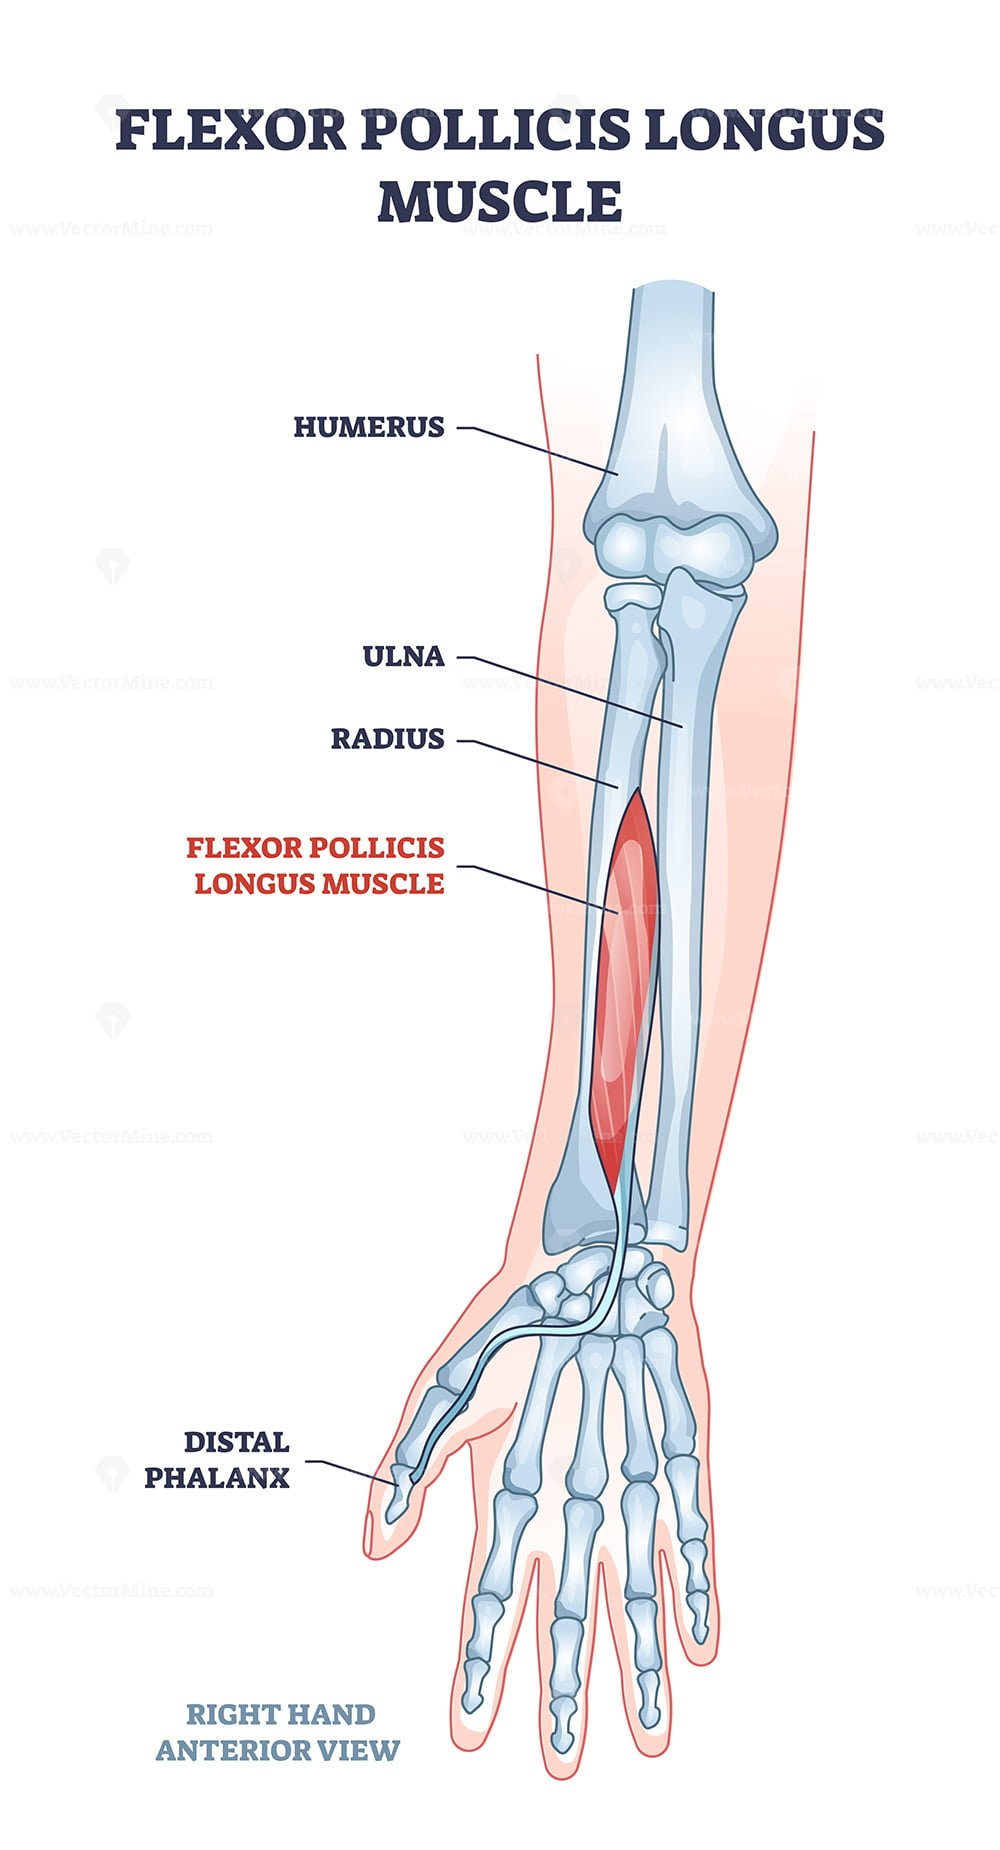 Flexot Pollicis Longus Muscle And Human Arm Or Hand Bones Outline